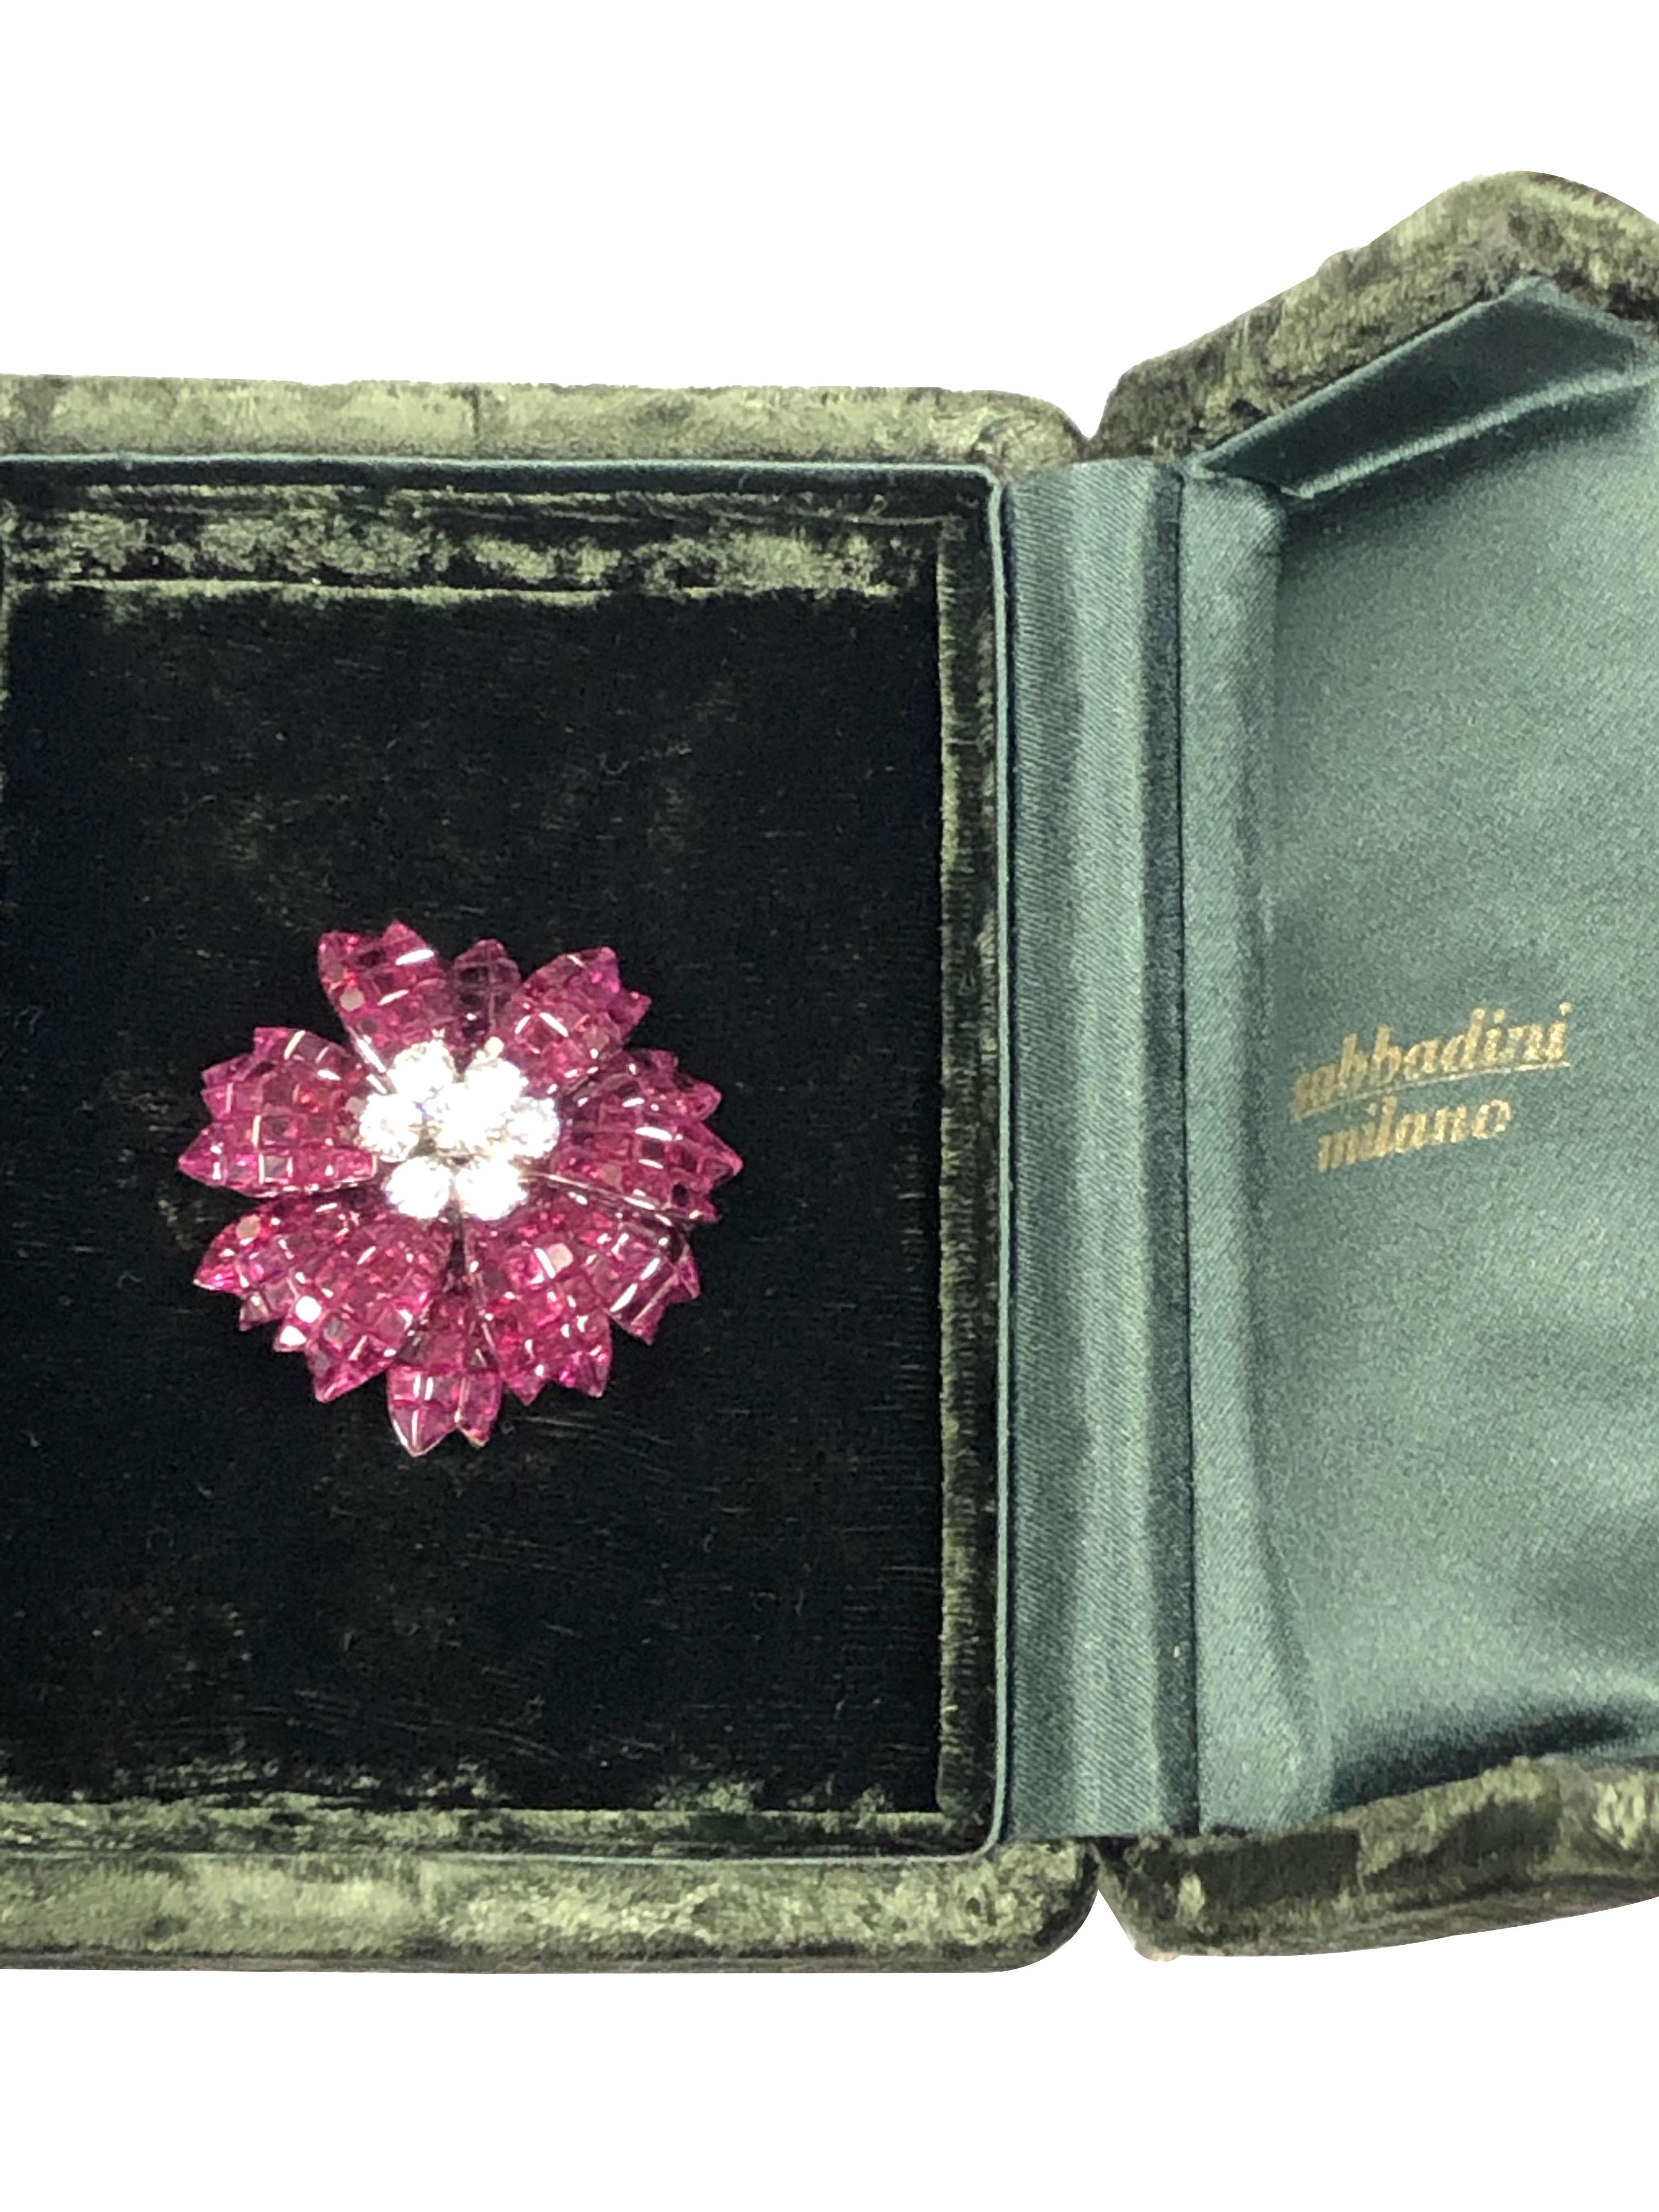 Sabbadini Invisible set Gold Ruby and Diamond Flower Brooch 1